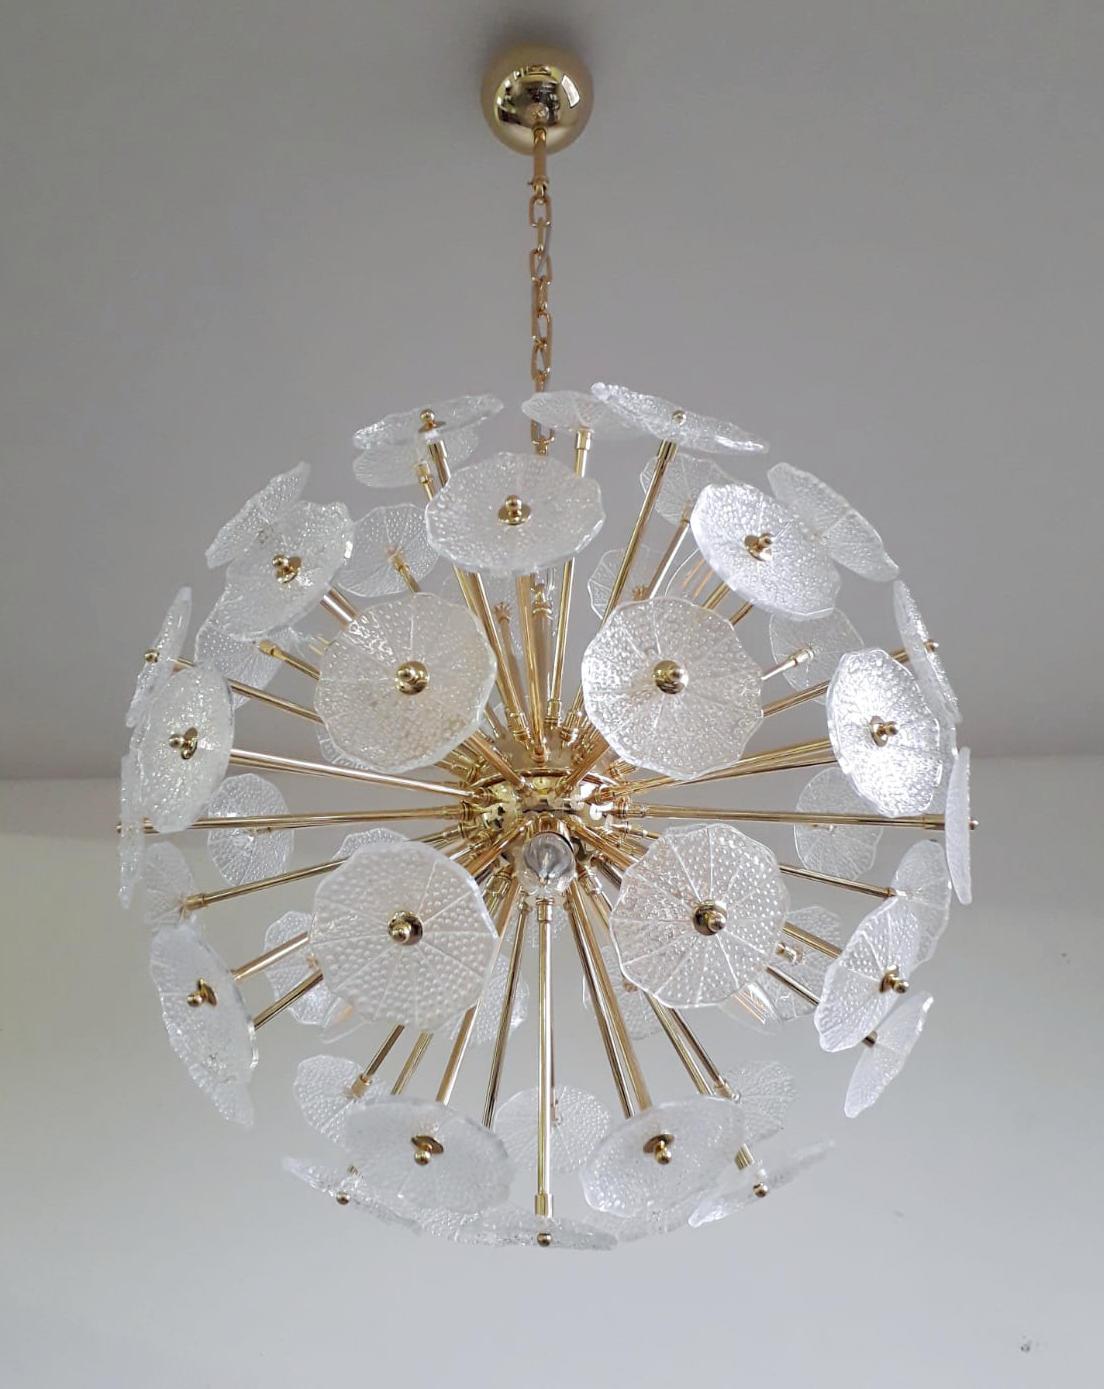 Italian Sputnik chandelier with clear Murano glasses with textured bubbles, mounted on 24-karat gold-plated metal frame / the glasses are vintage pieces made in Italy circa 1960s / the gold frame is newly made in Italy / designed by Fabio Bergomi